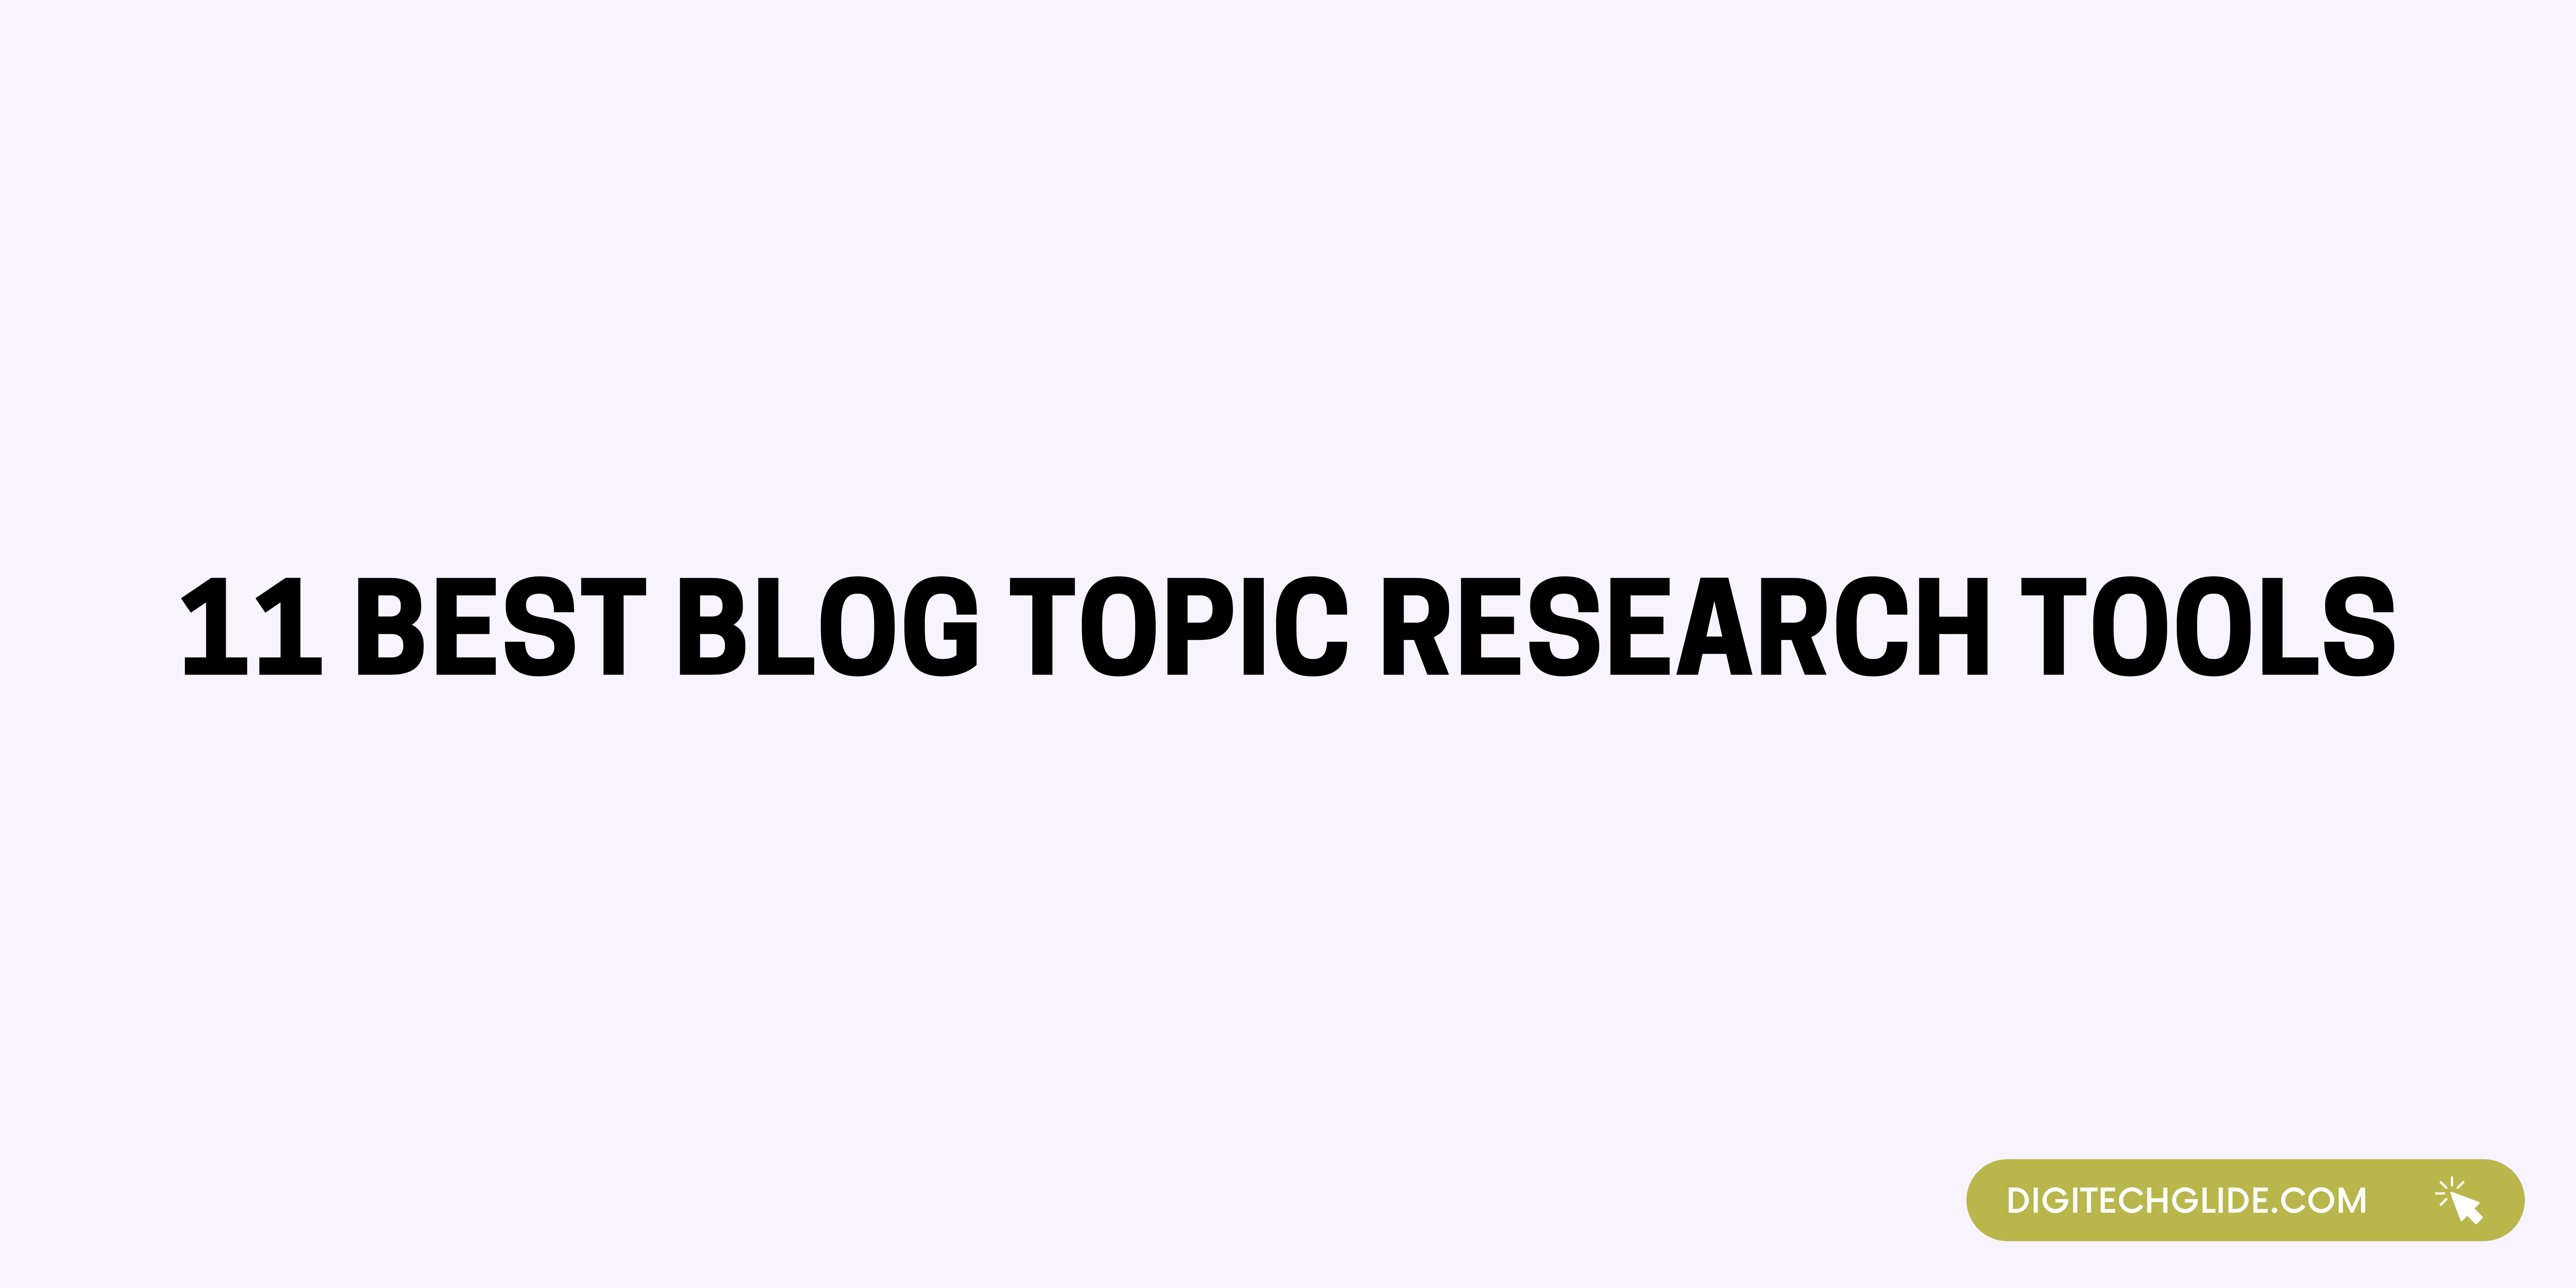 11 Best Blog Topic Research Tools